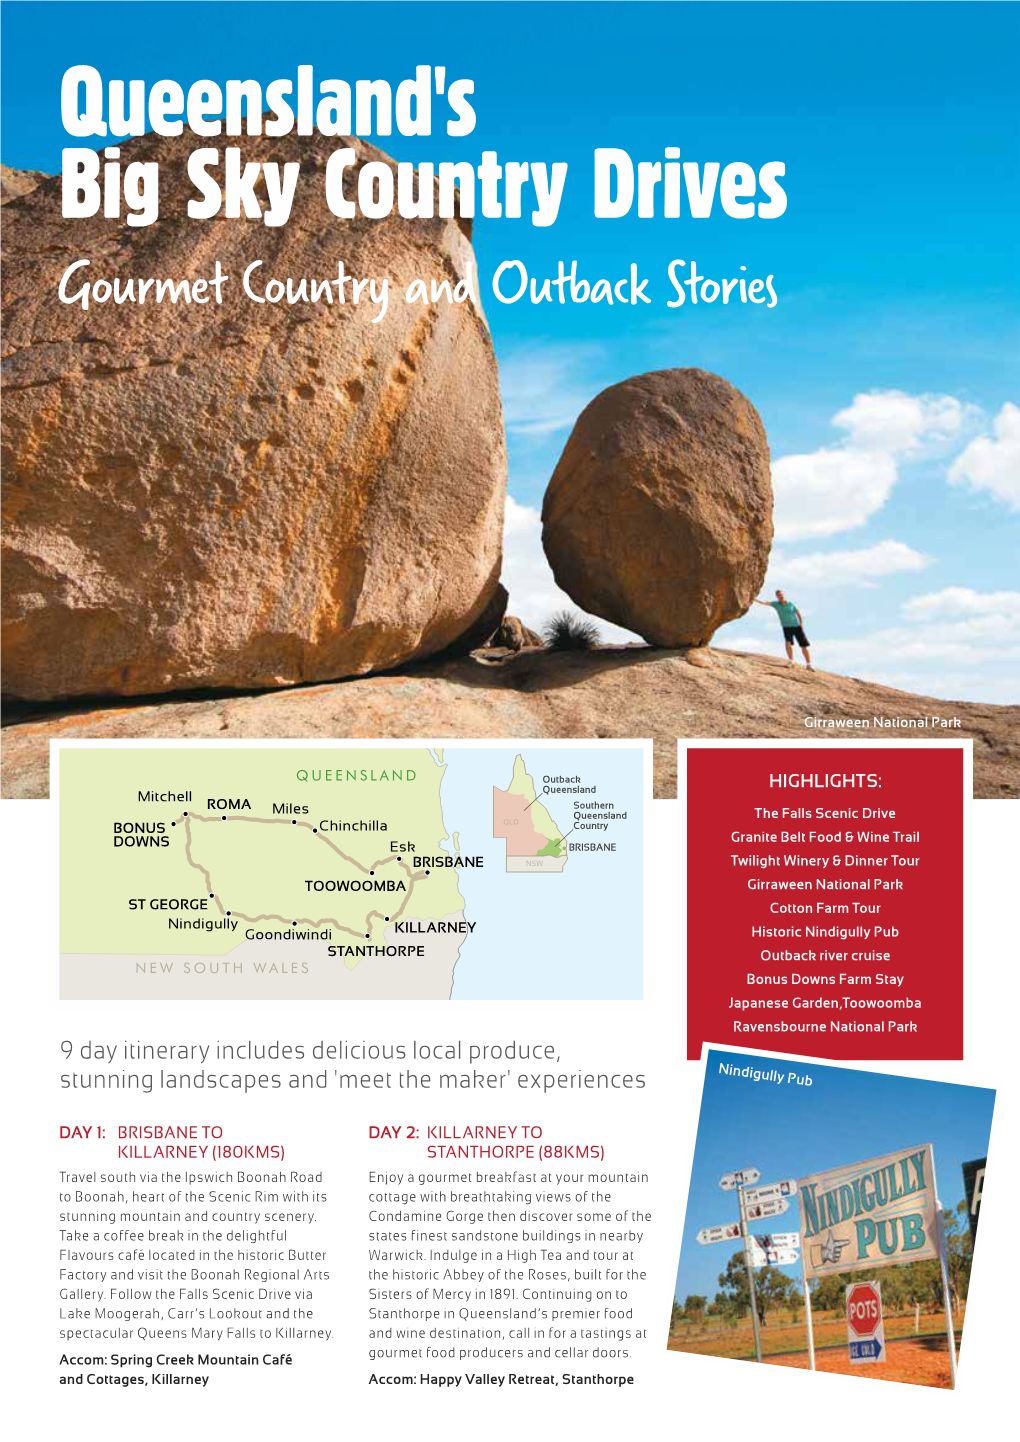 9 Day Outback Gourmet Country and Outback